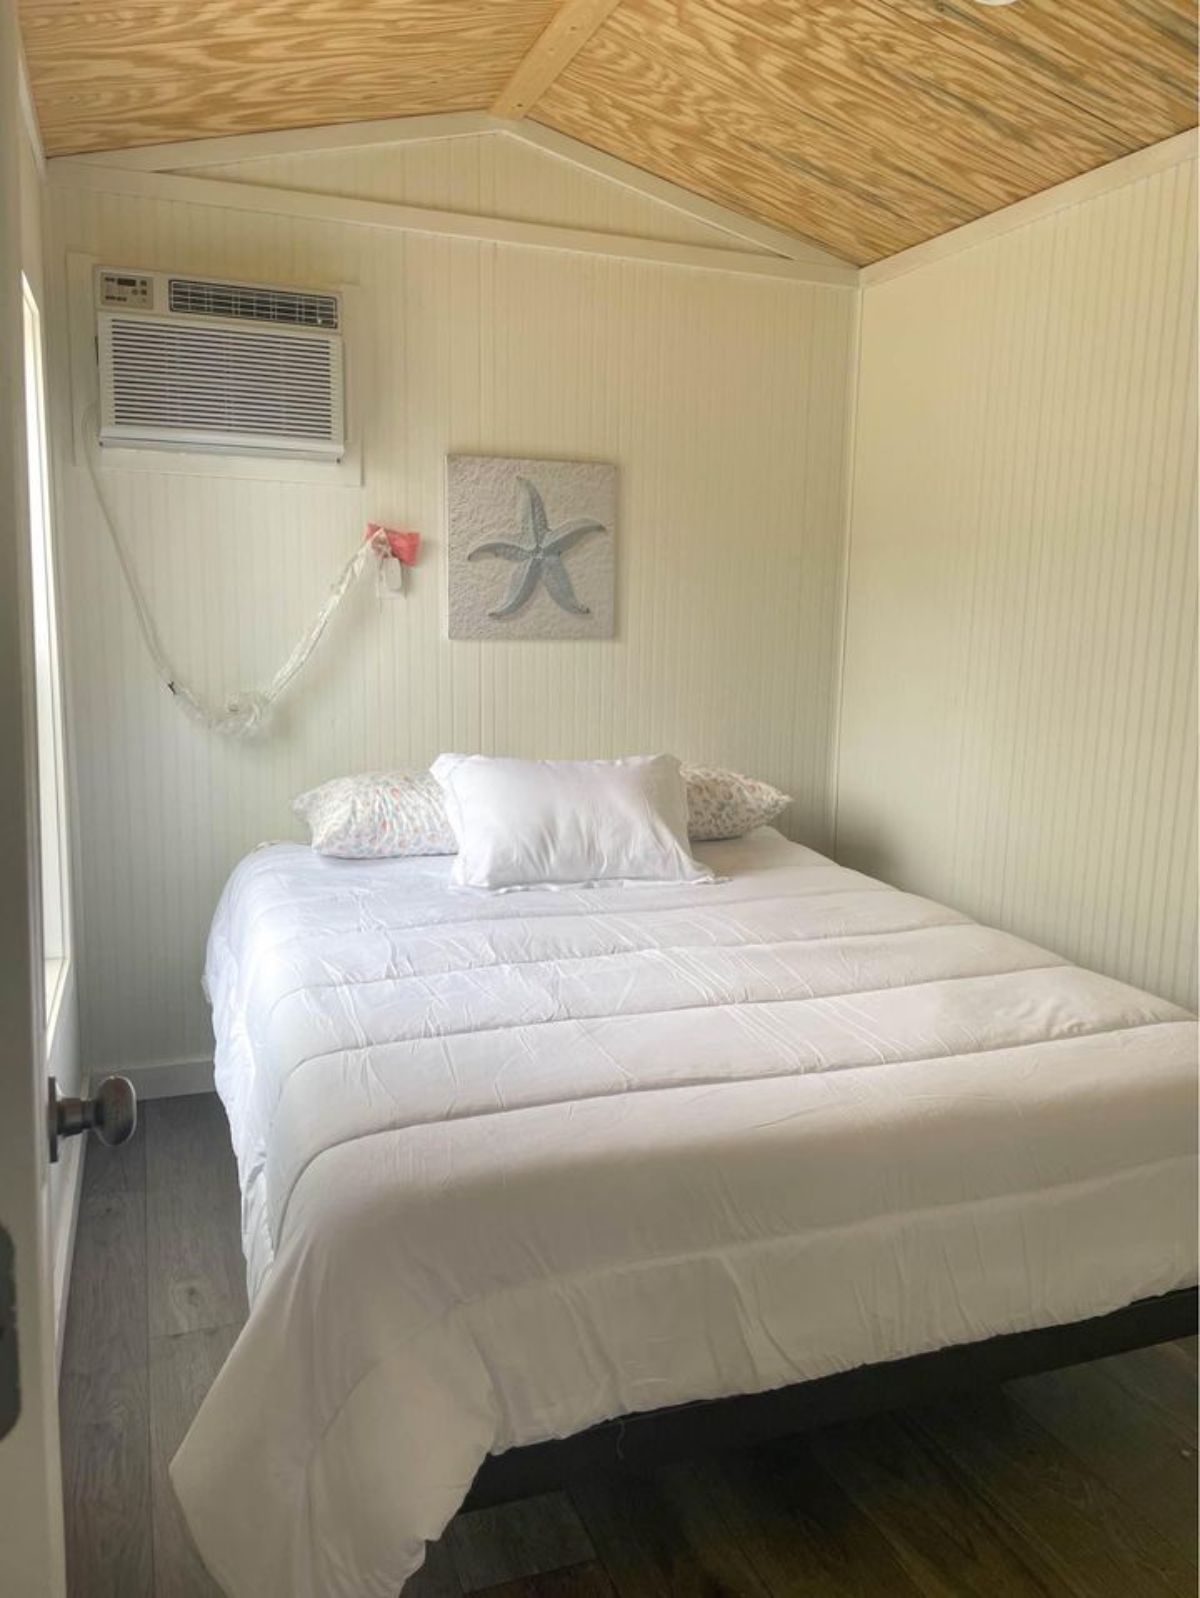 Bedroom of Brand New 35’ Tiny House has a queen bed and air condition unit